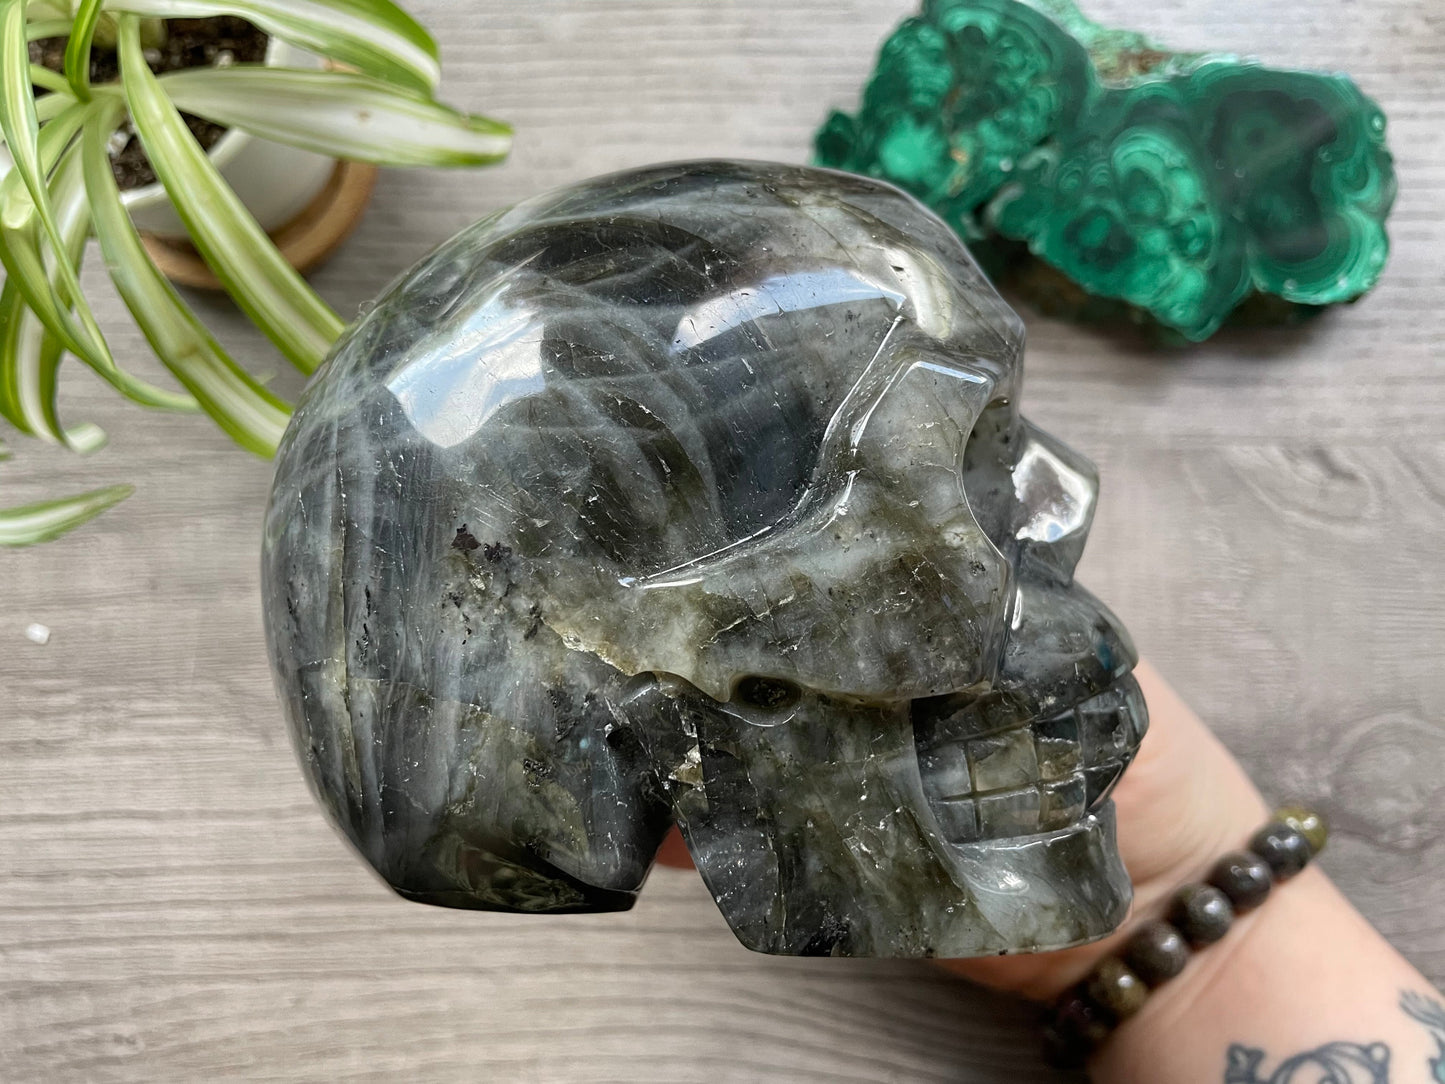 Labradorite Crystal Skull 1.2kg - The Wandering Fox Emporium, Your Metaphysical Store side